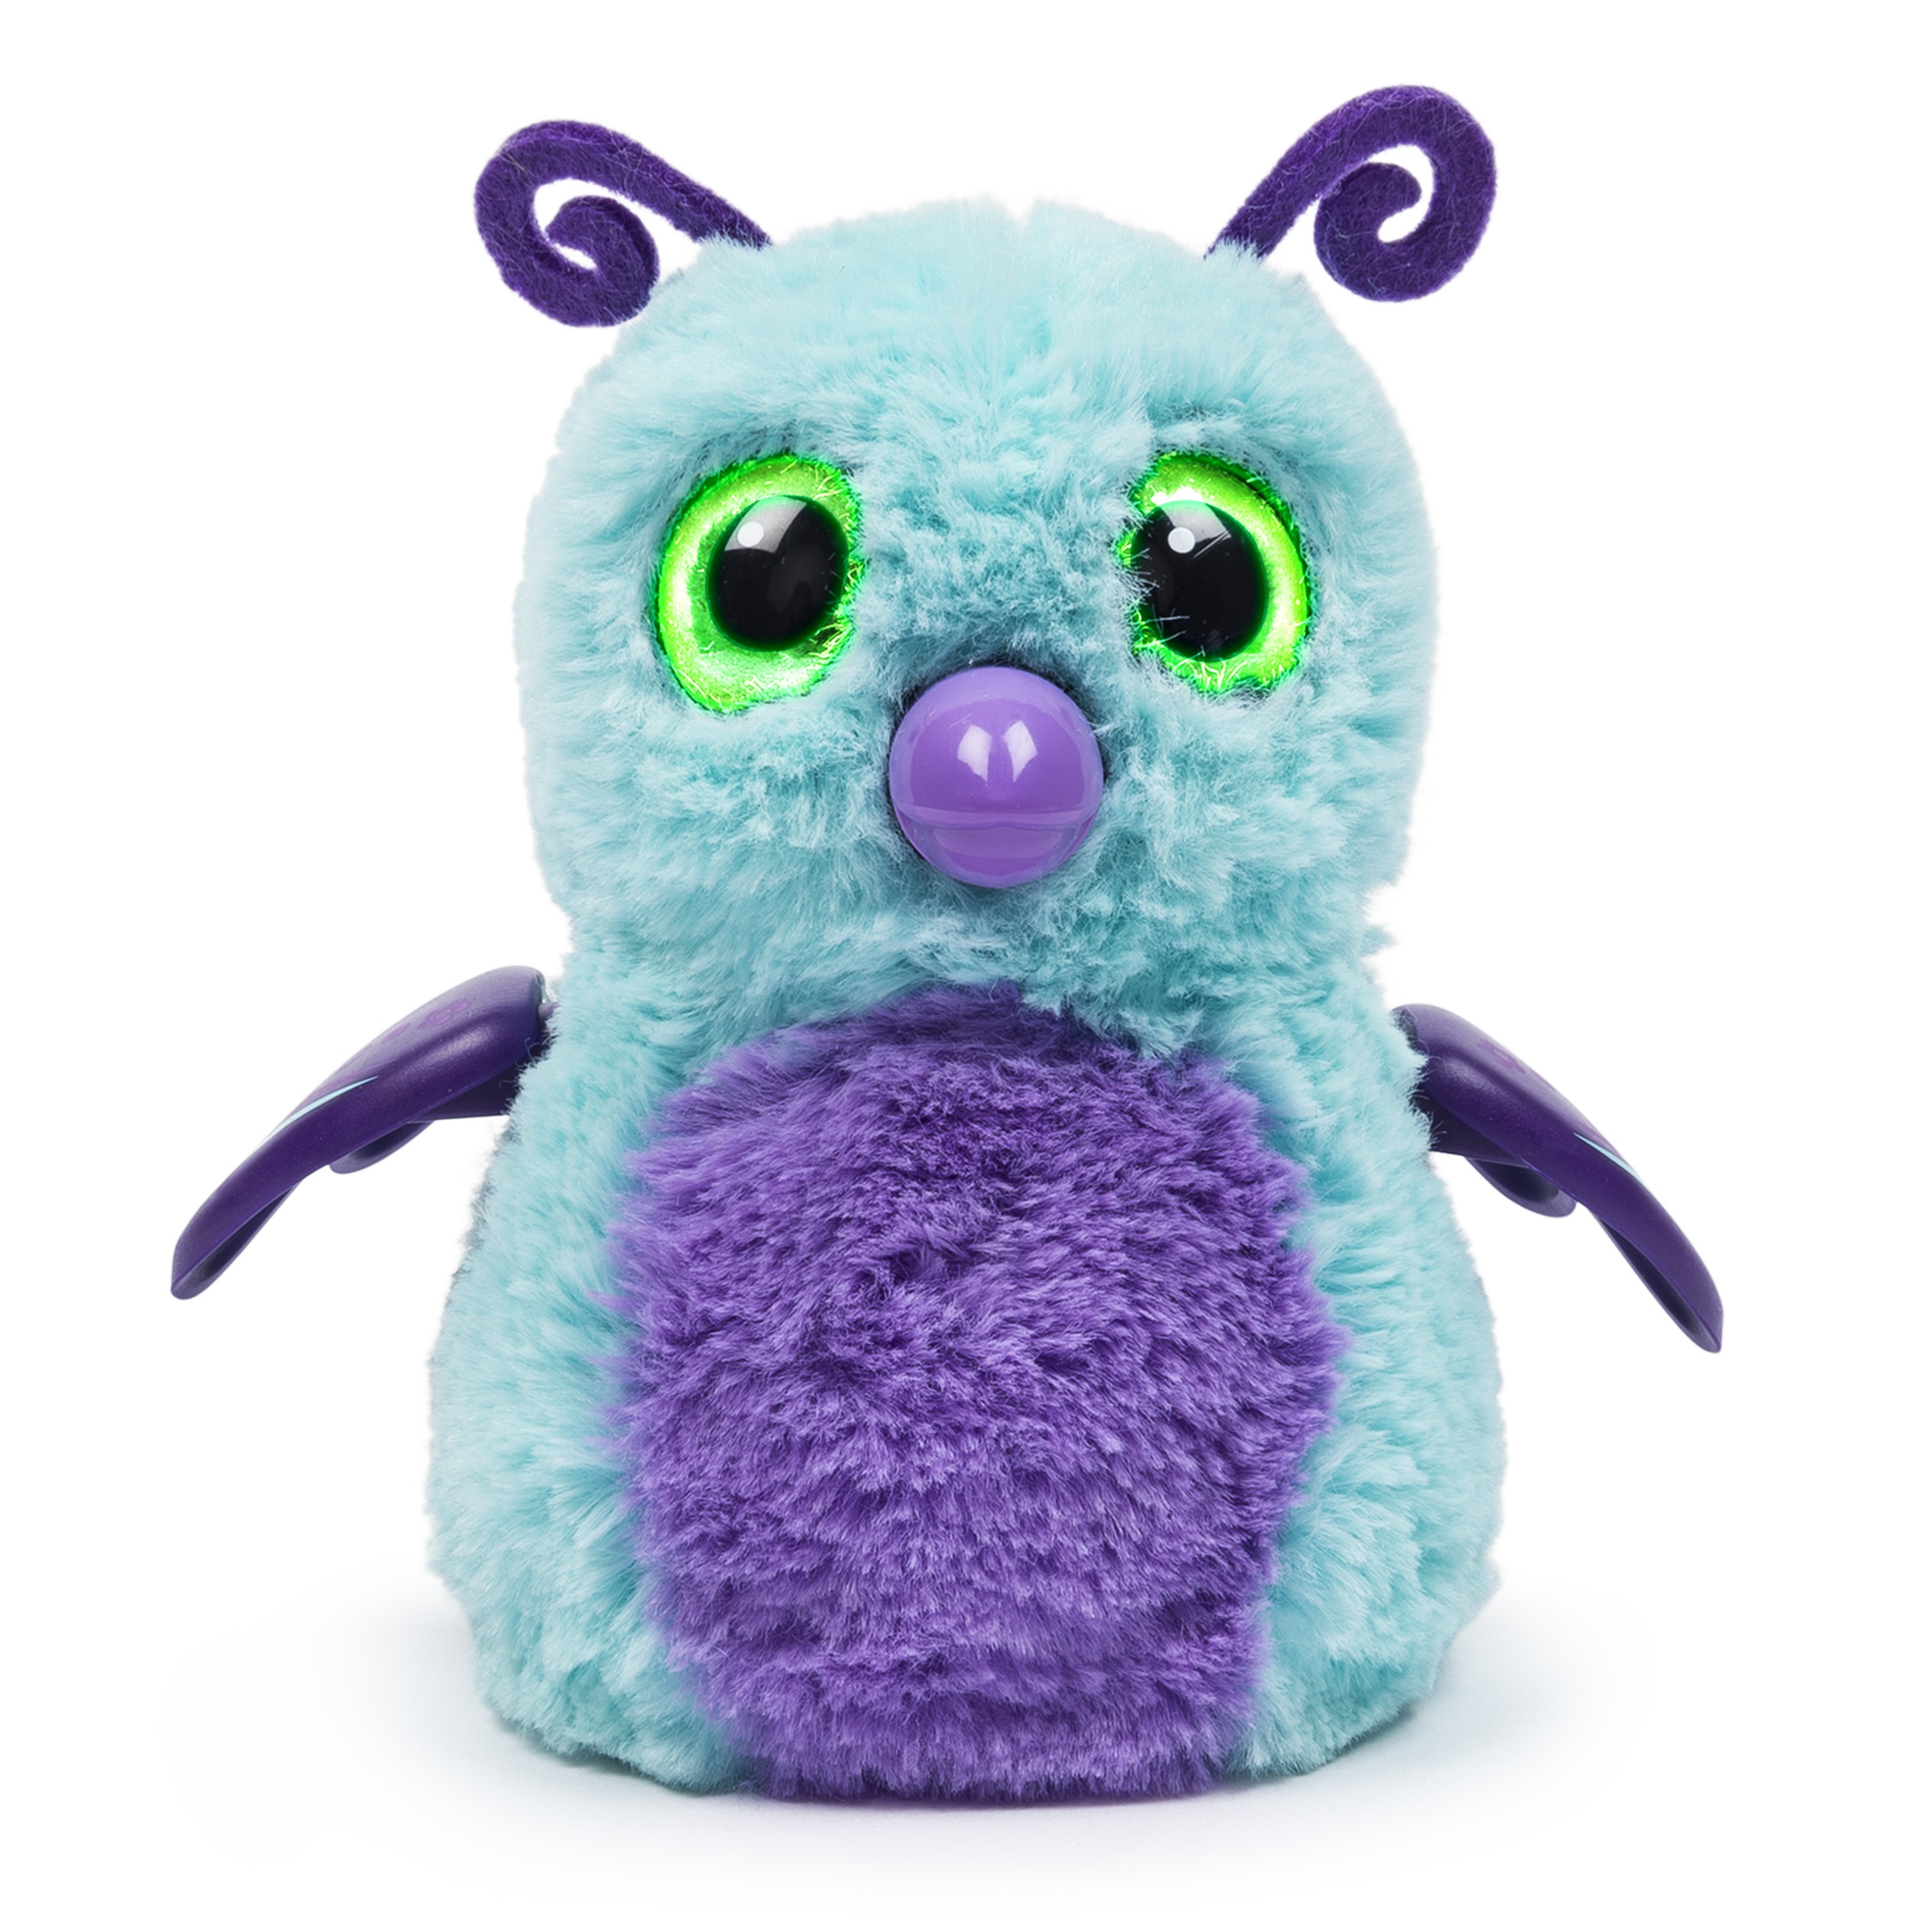 Hatchimals - Hatching Egg - Interactive Creature - Burtle - Purple/Teal Egg - Walmart Exclusive by Spin Master - image 3 of 7